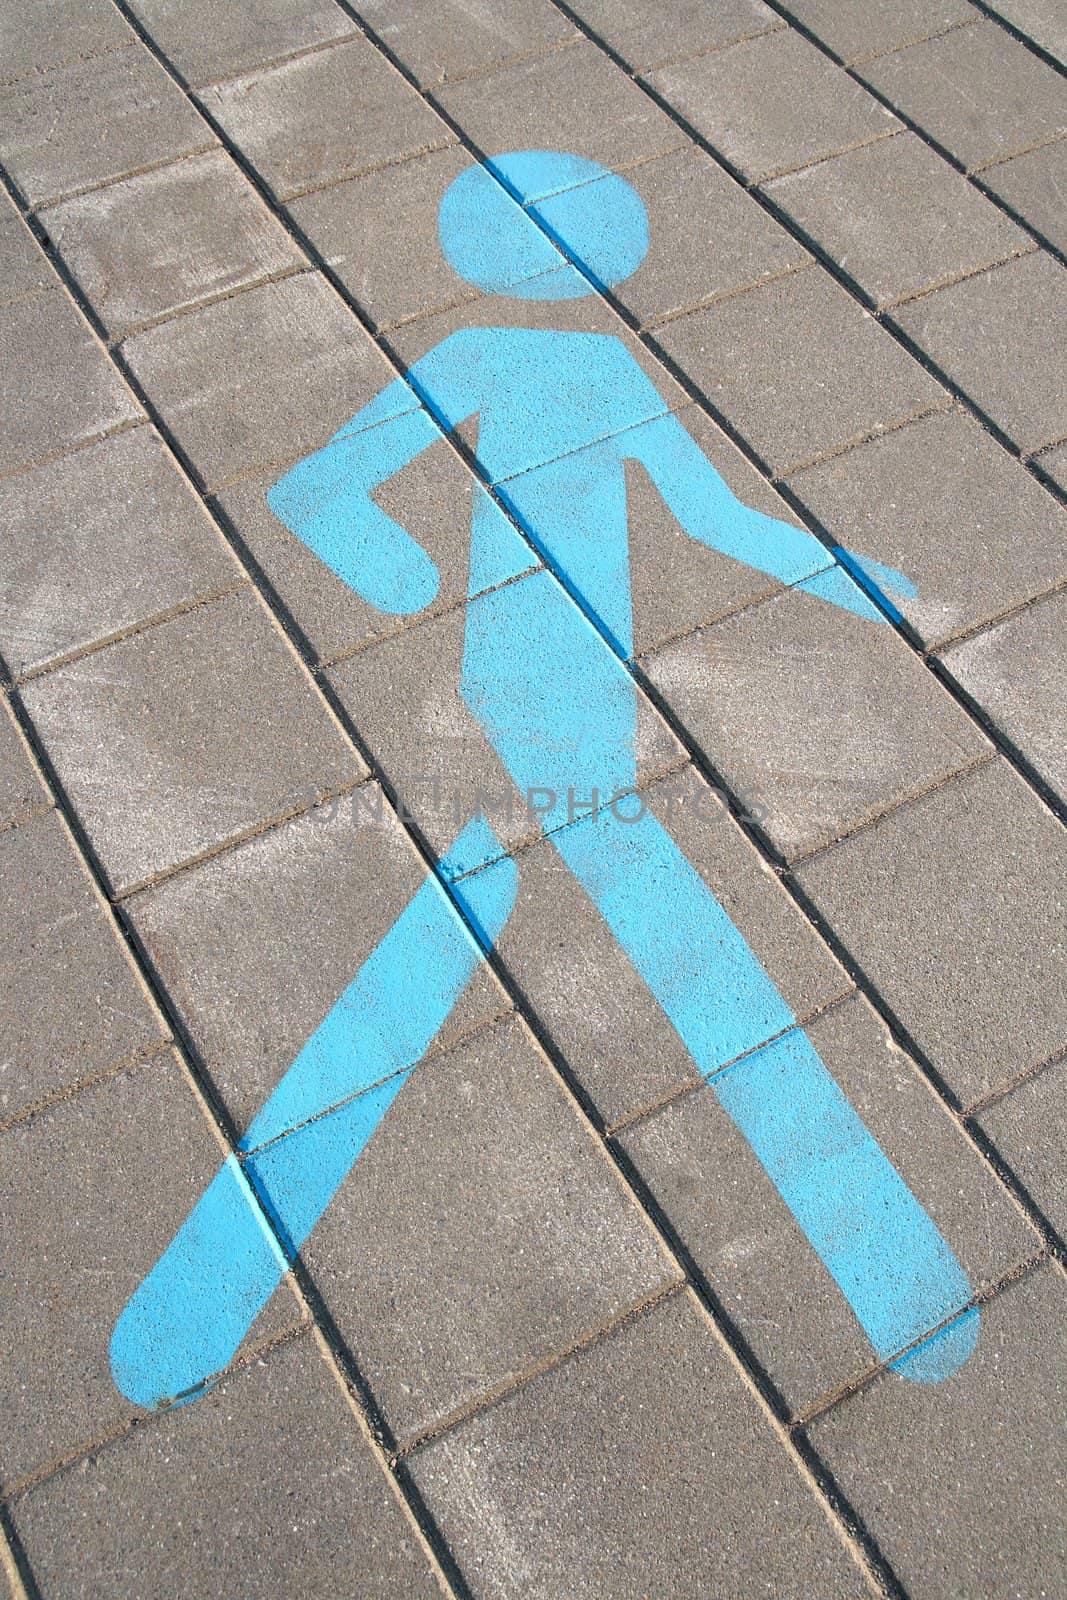 Walking area. Pedestrian sign painted on the pavement.